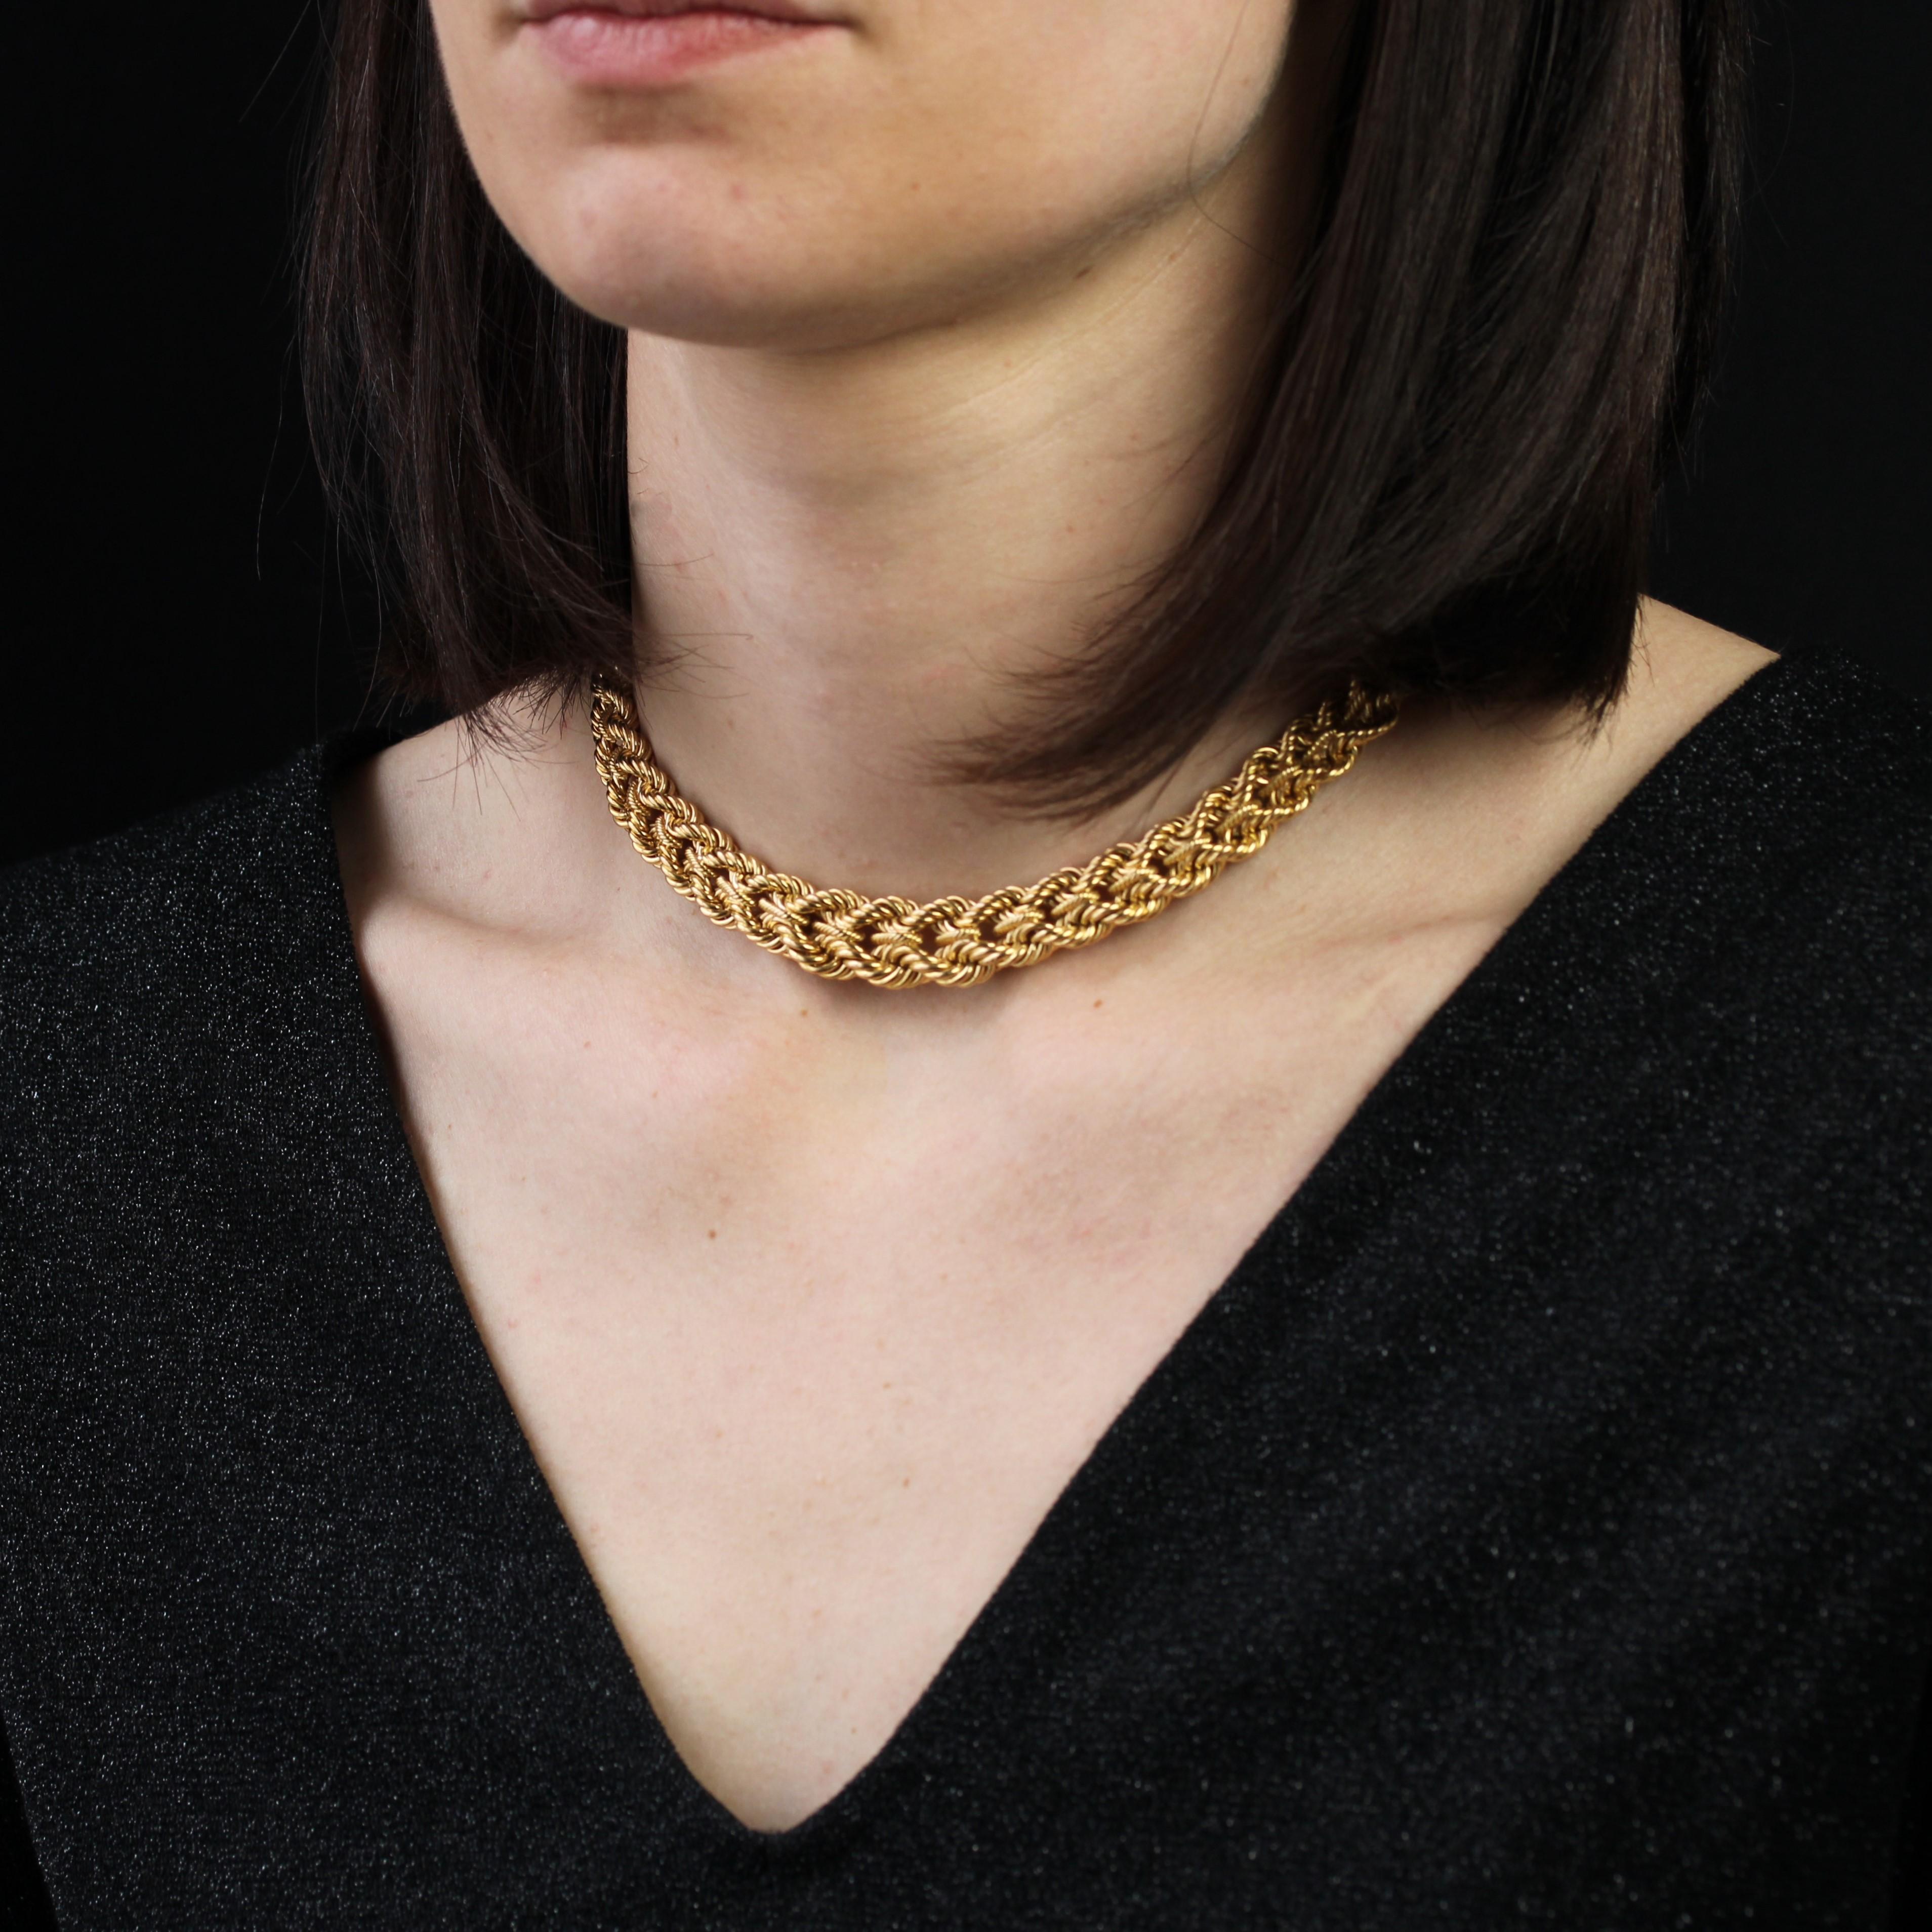 French 1950s 18 Karat Yellow Gold Falling Braided Choker Necklace For Sale 4